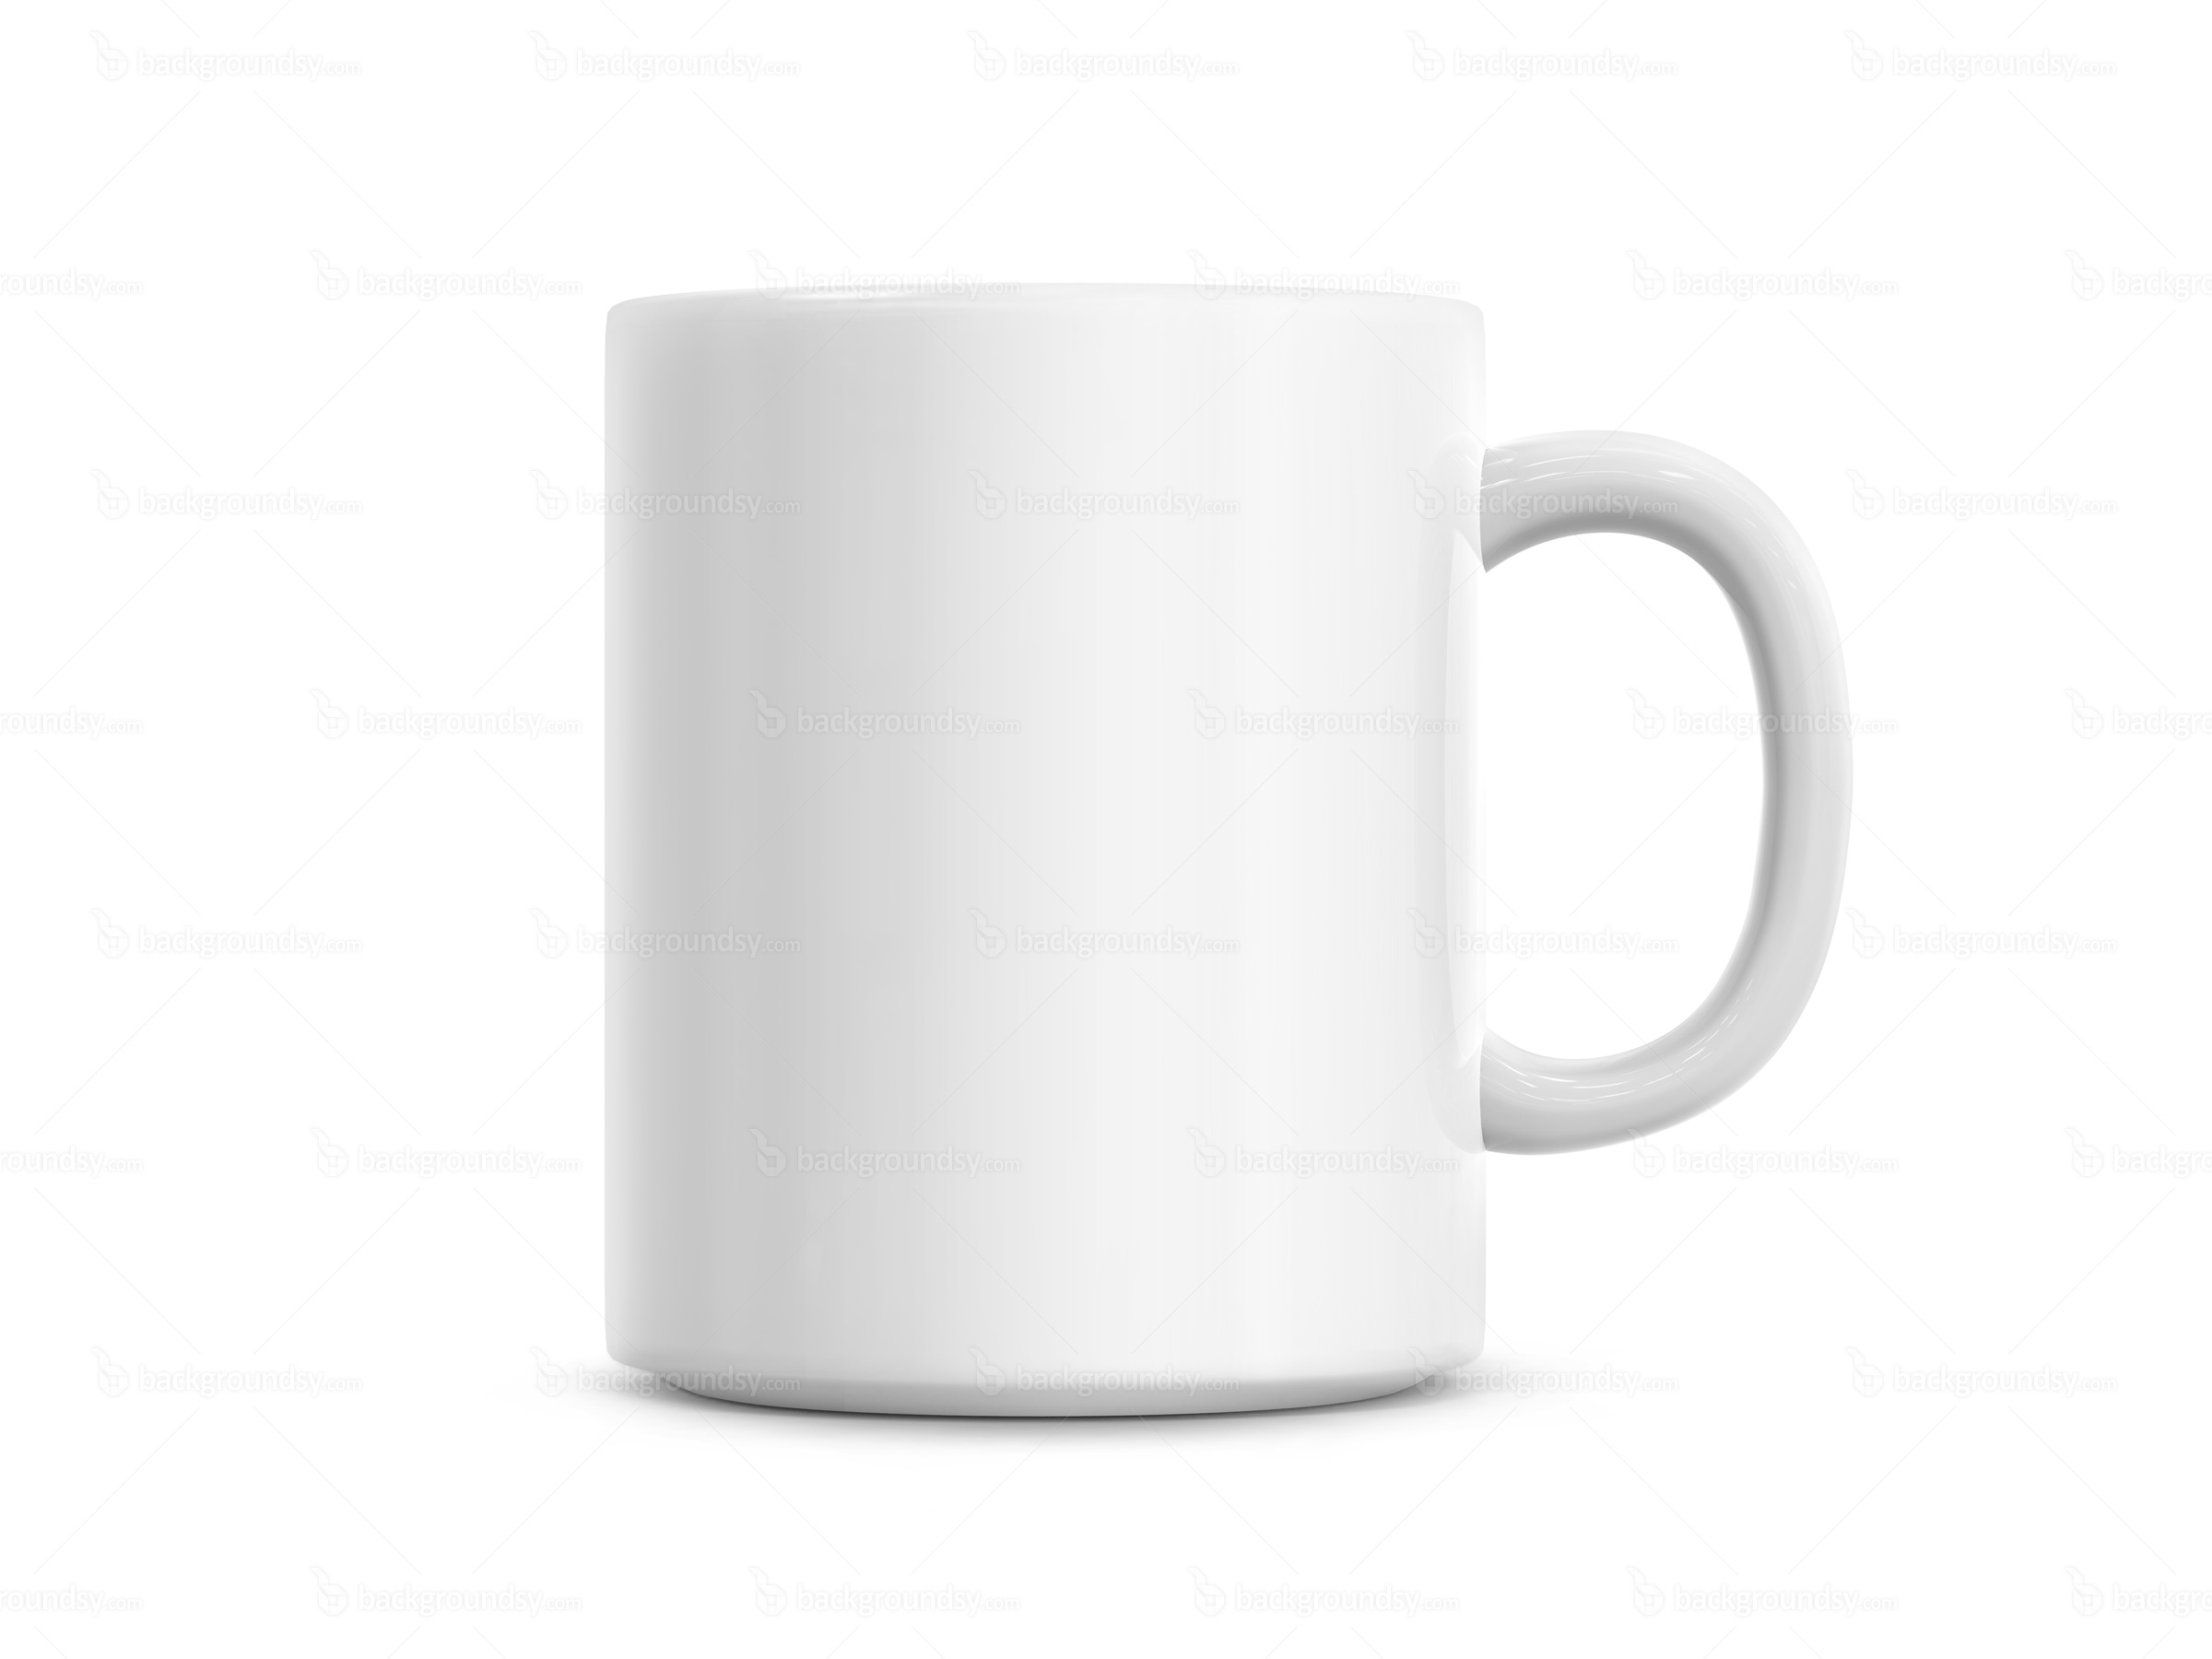 https://www.peterjthomson.com/wp-content/uploads/2014/08/white-coffee-cup.jpg